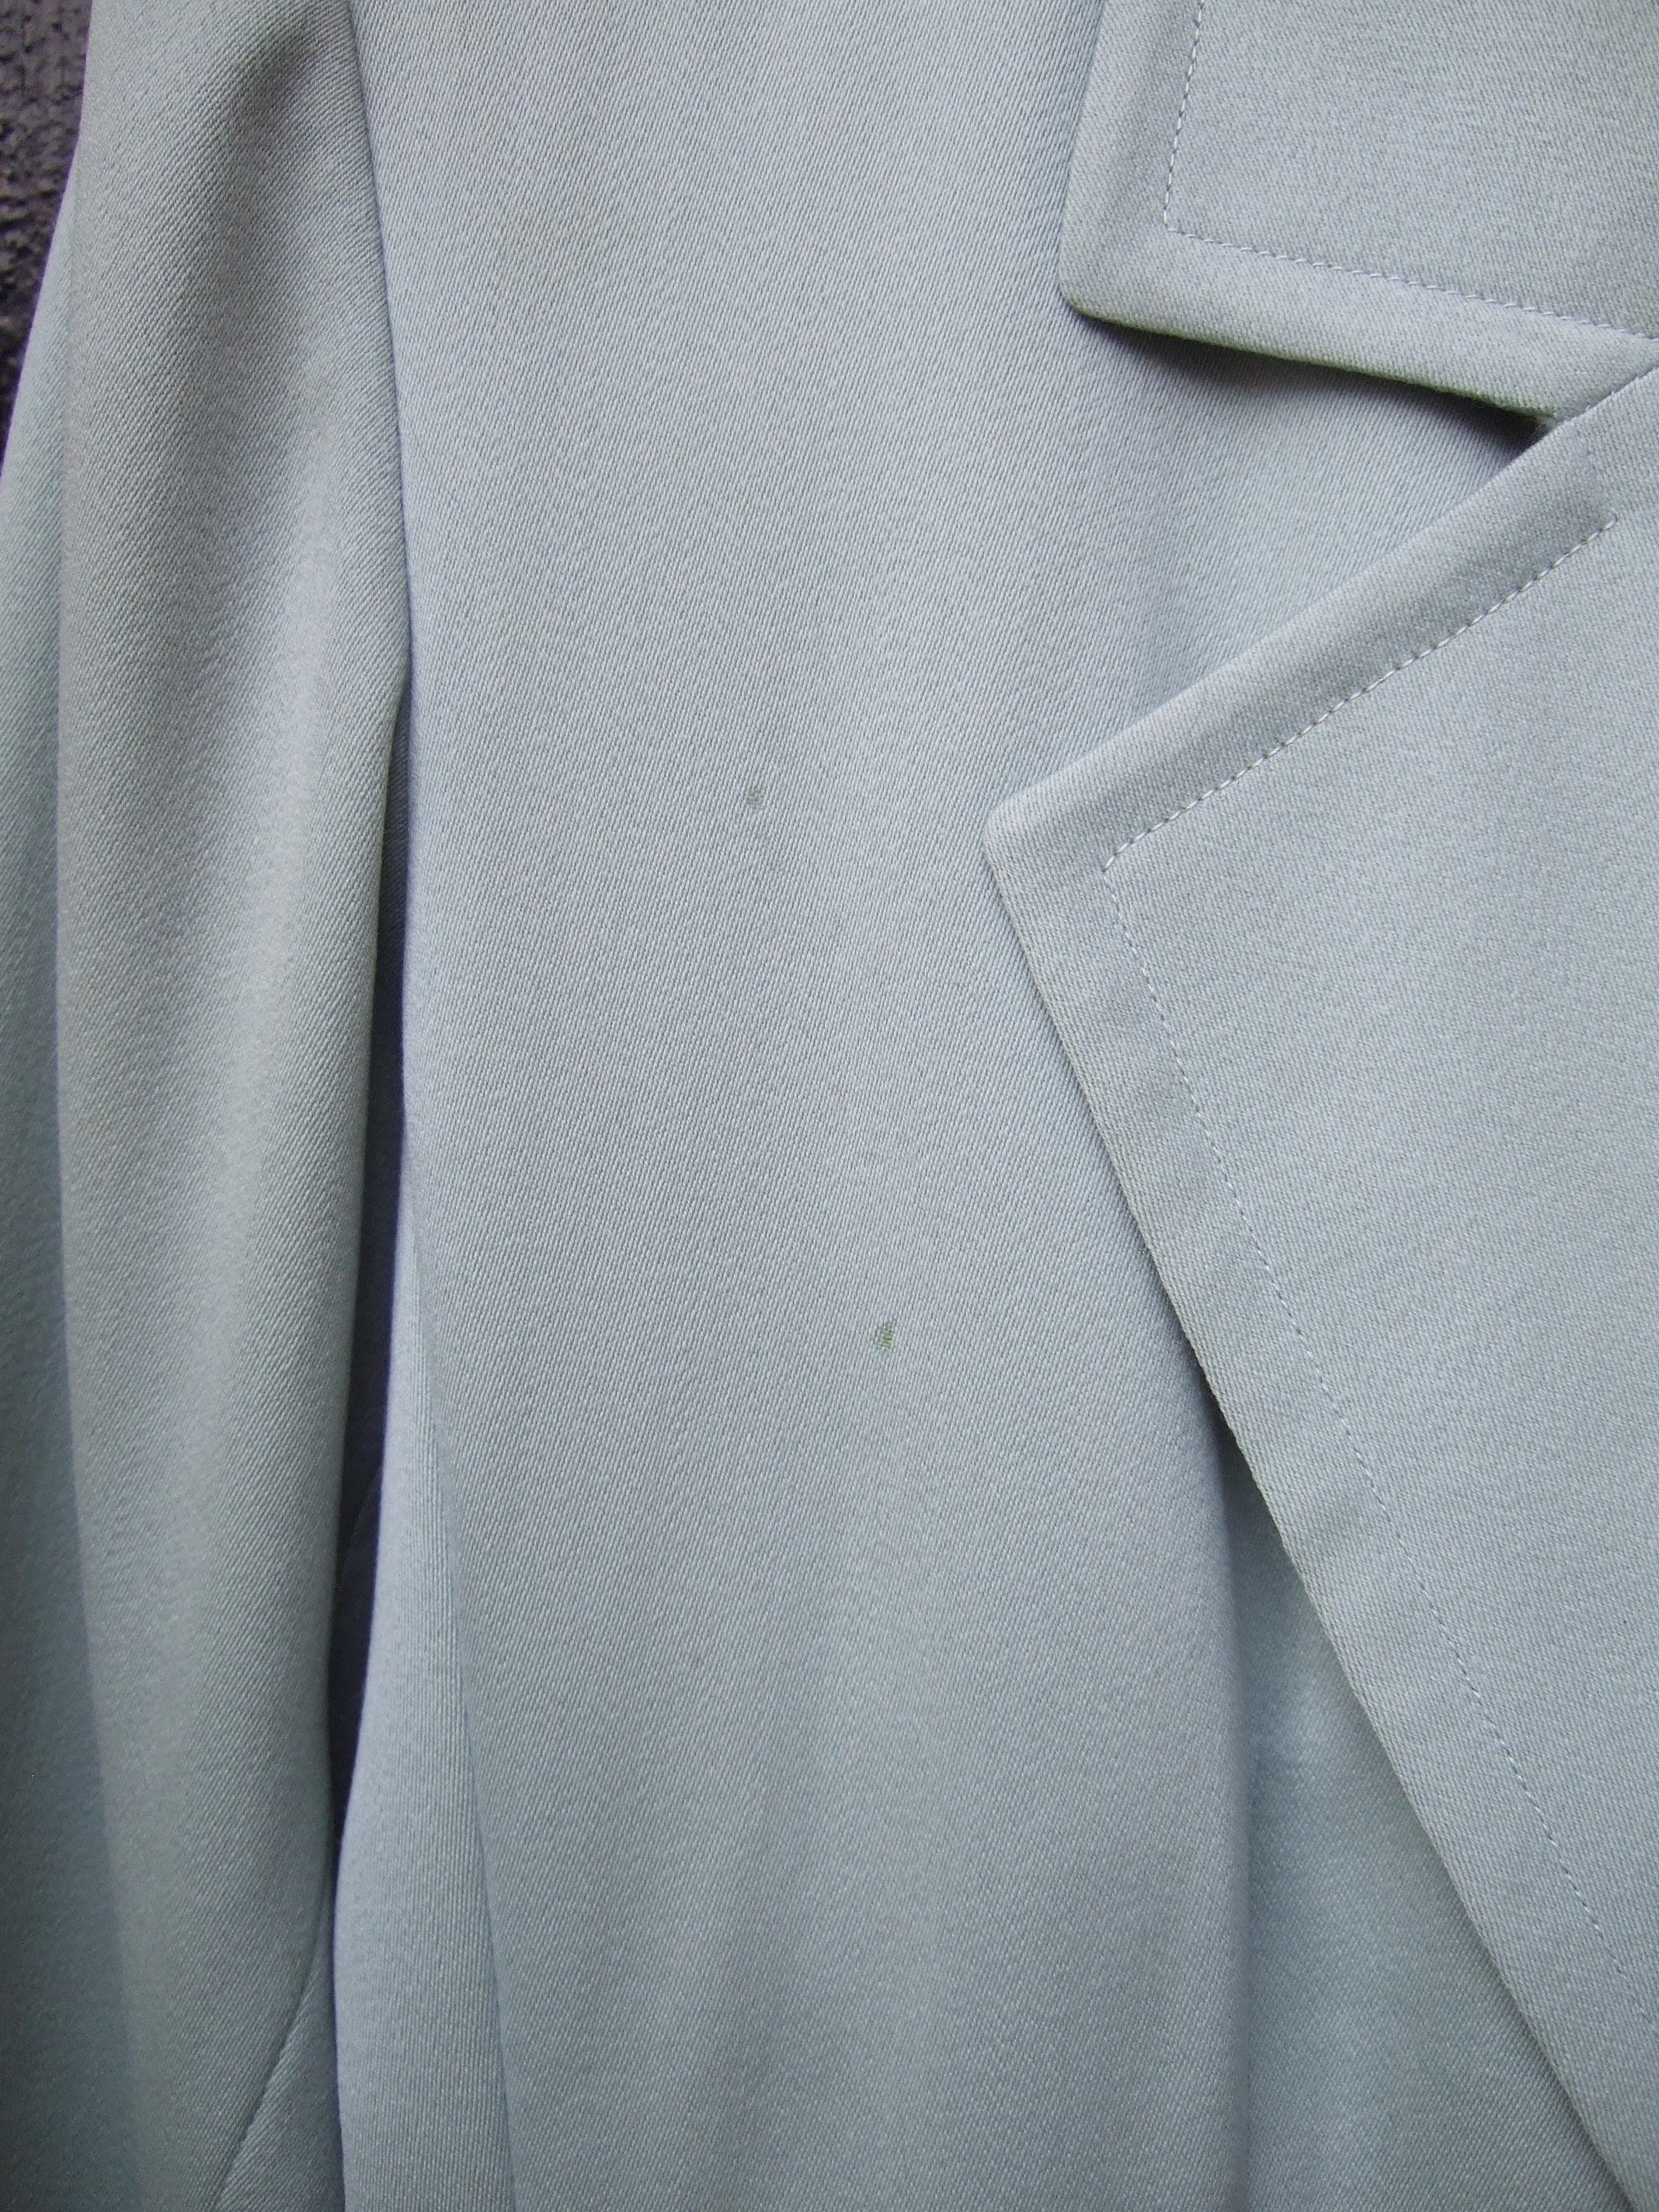 Yves Saint Laurent Couture Sage Green Suit. 1980's Power Dressing. For Sale 4